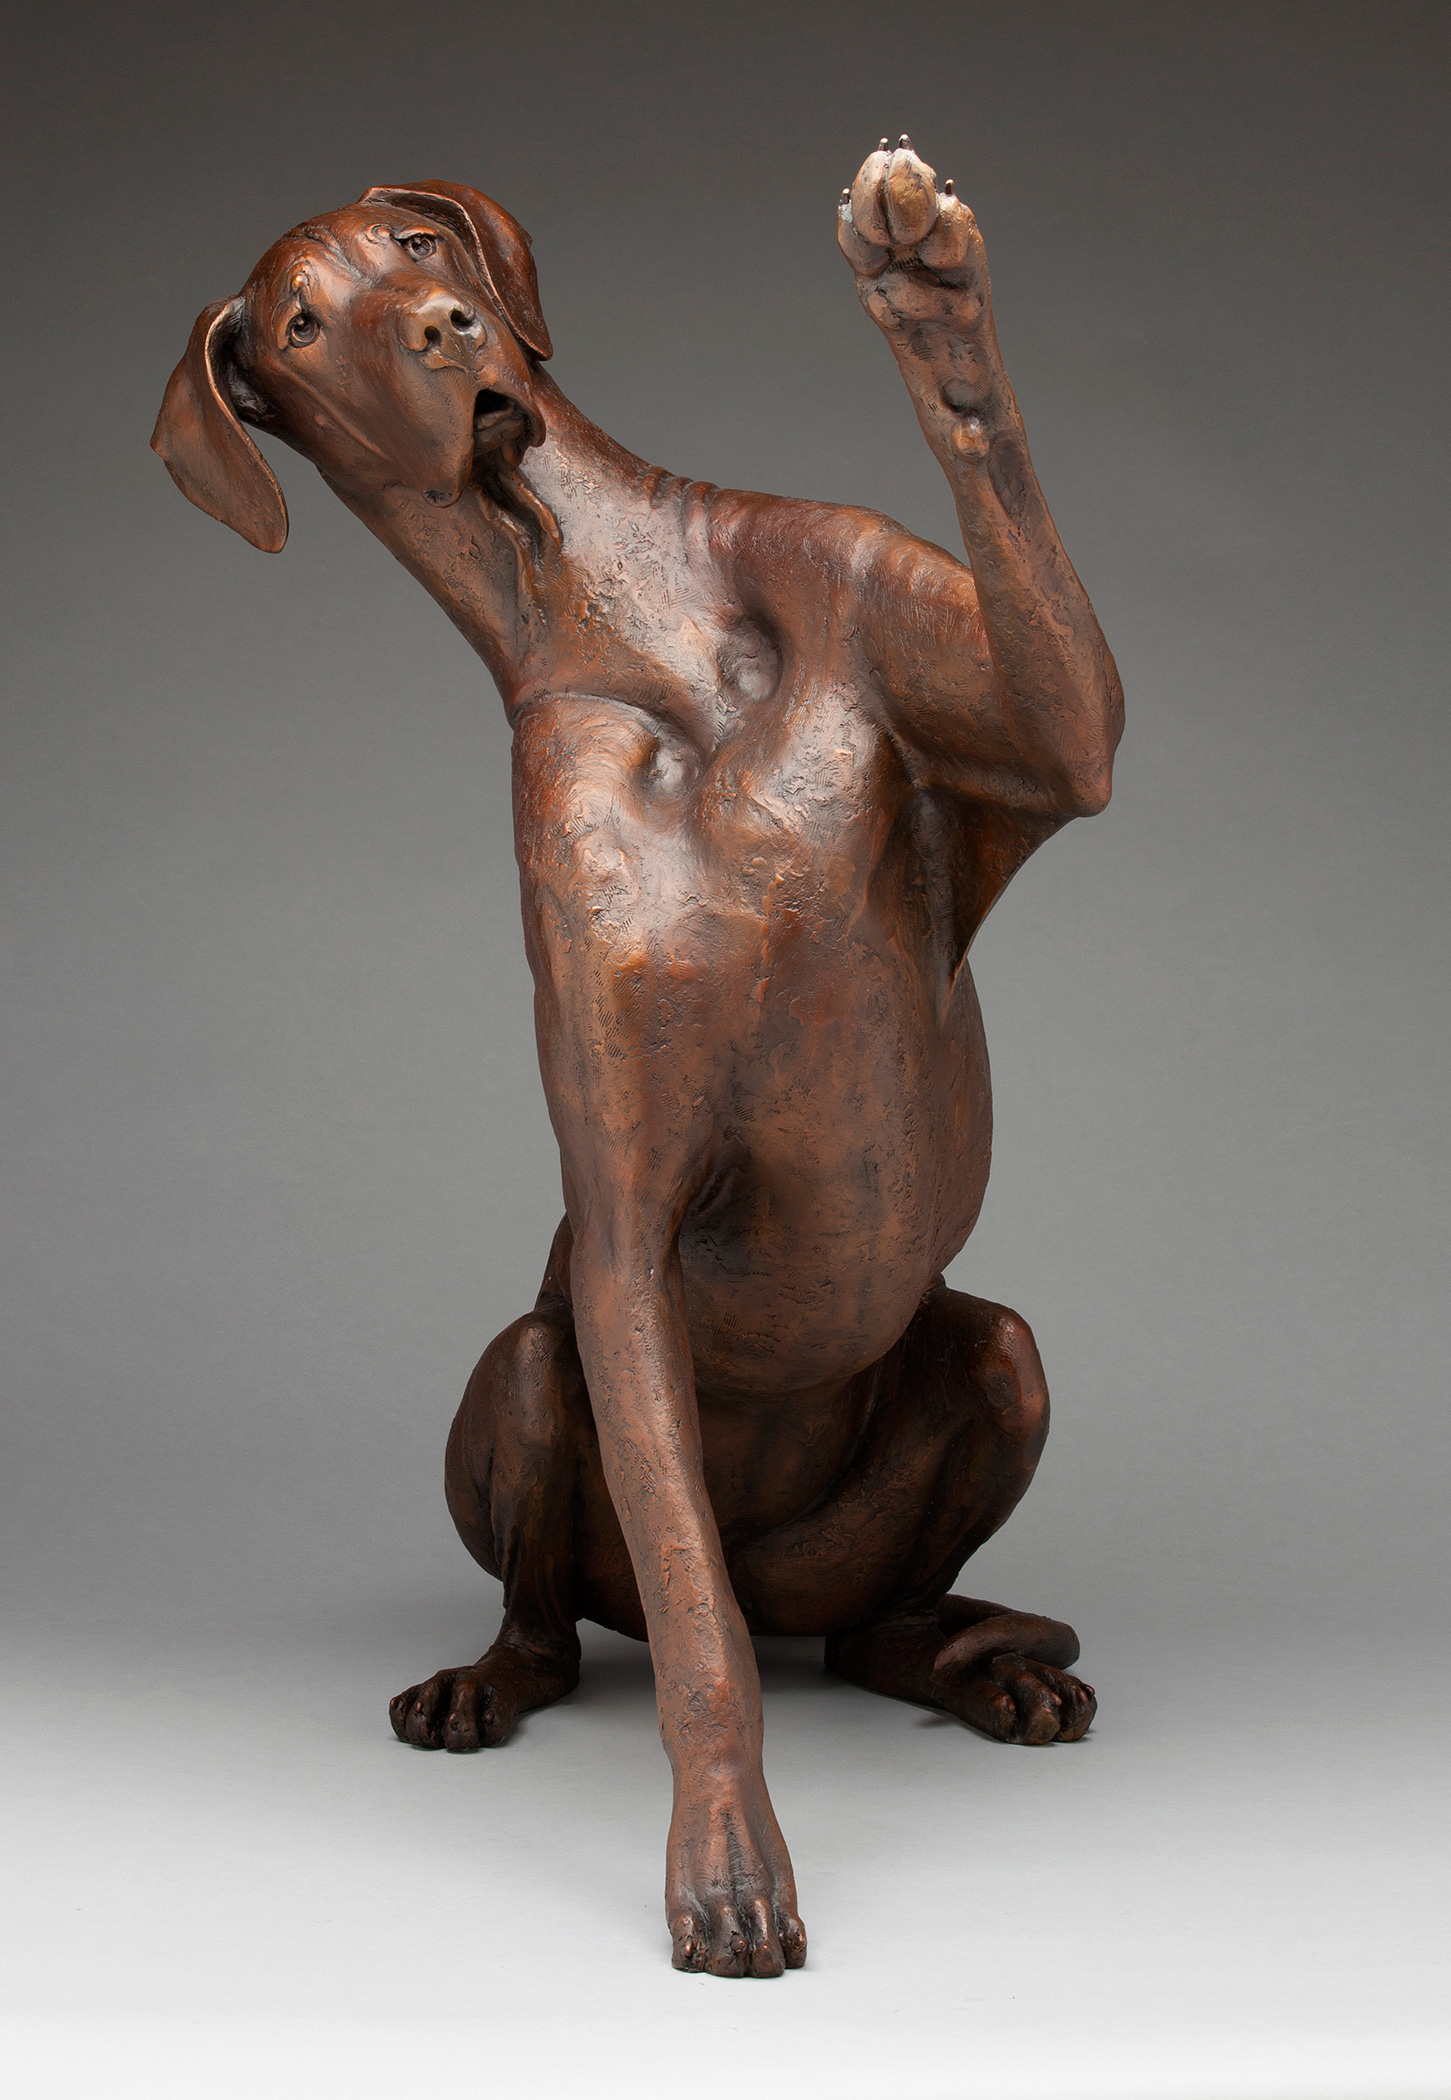 High Four
by Louise Peterson, FNSS
Bronze
44